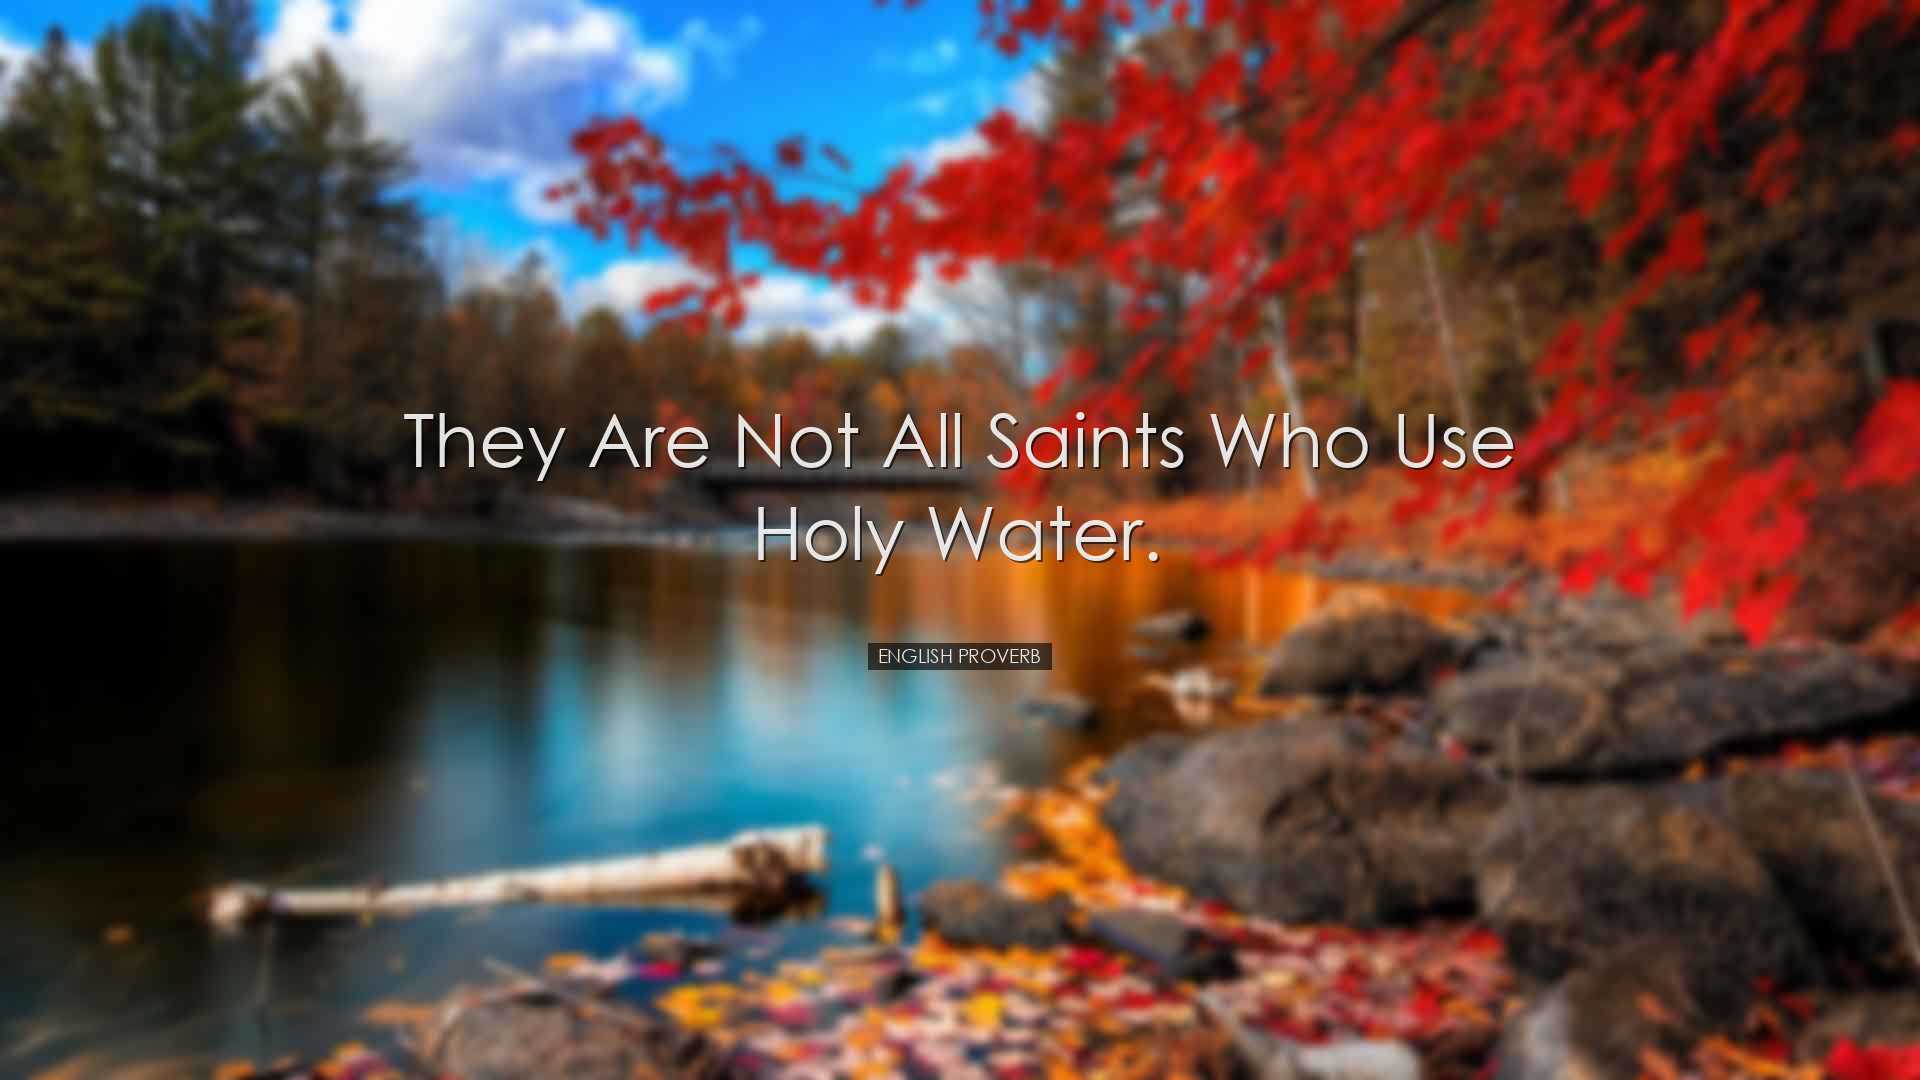 They are not all saints who use holy water. - English Proverb